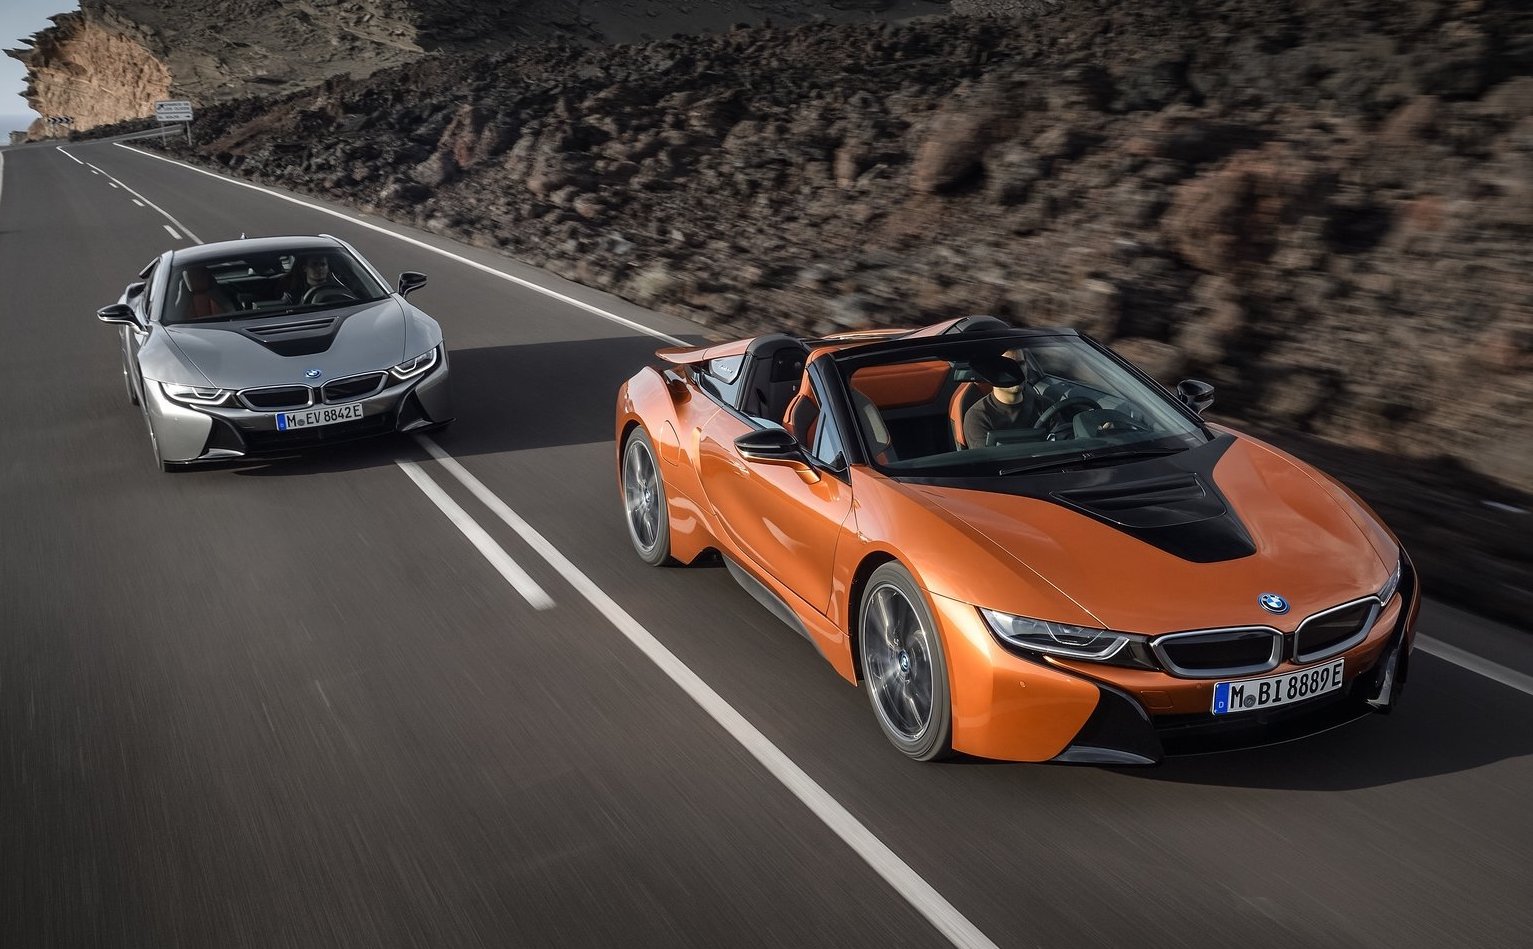 BMW i8 production coming to an end, over 20,000 sold